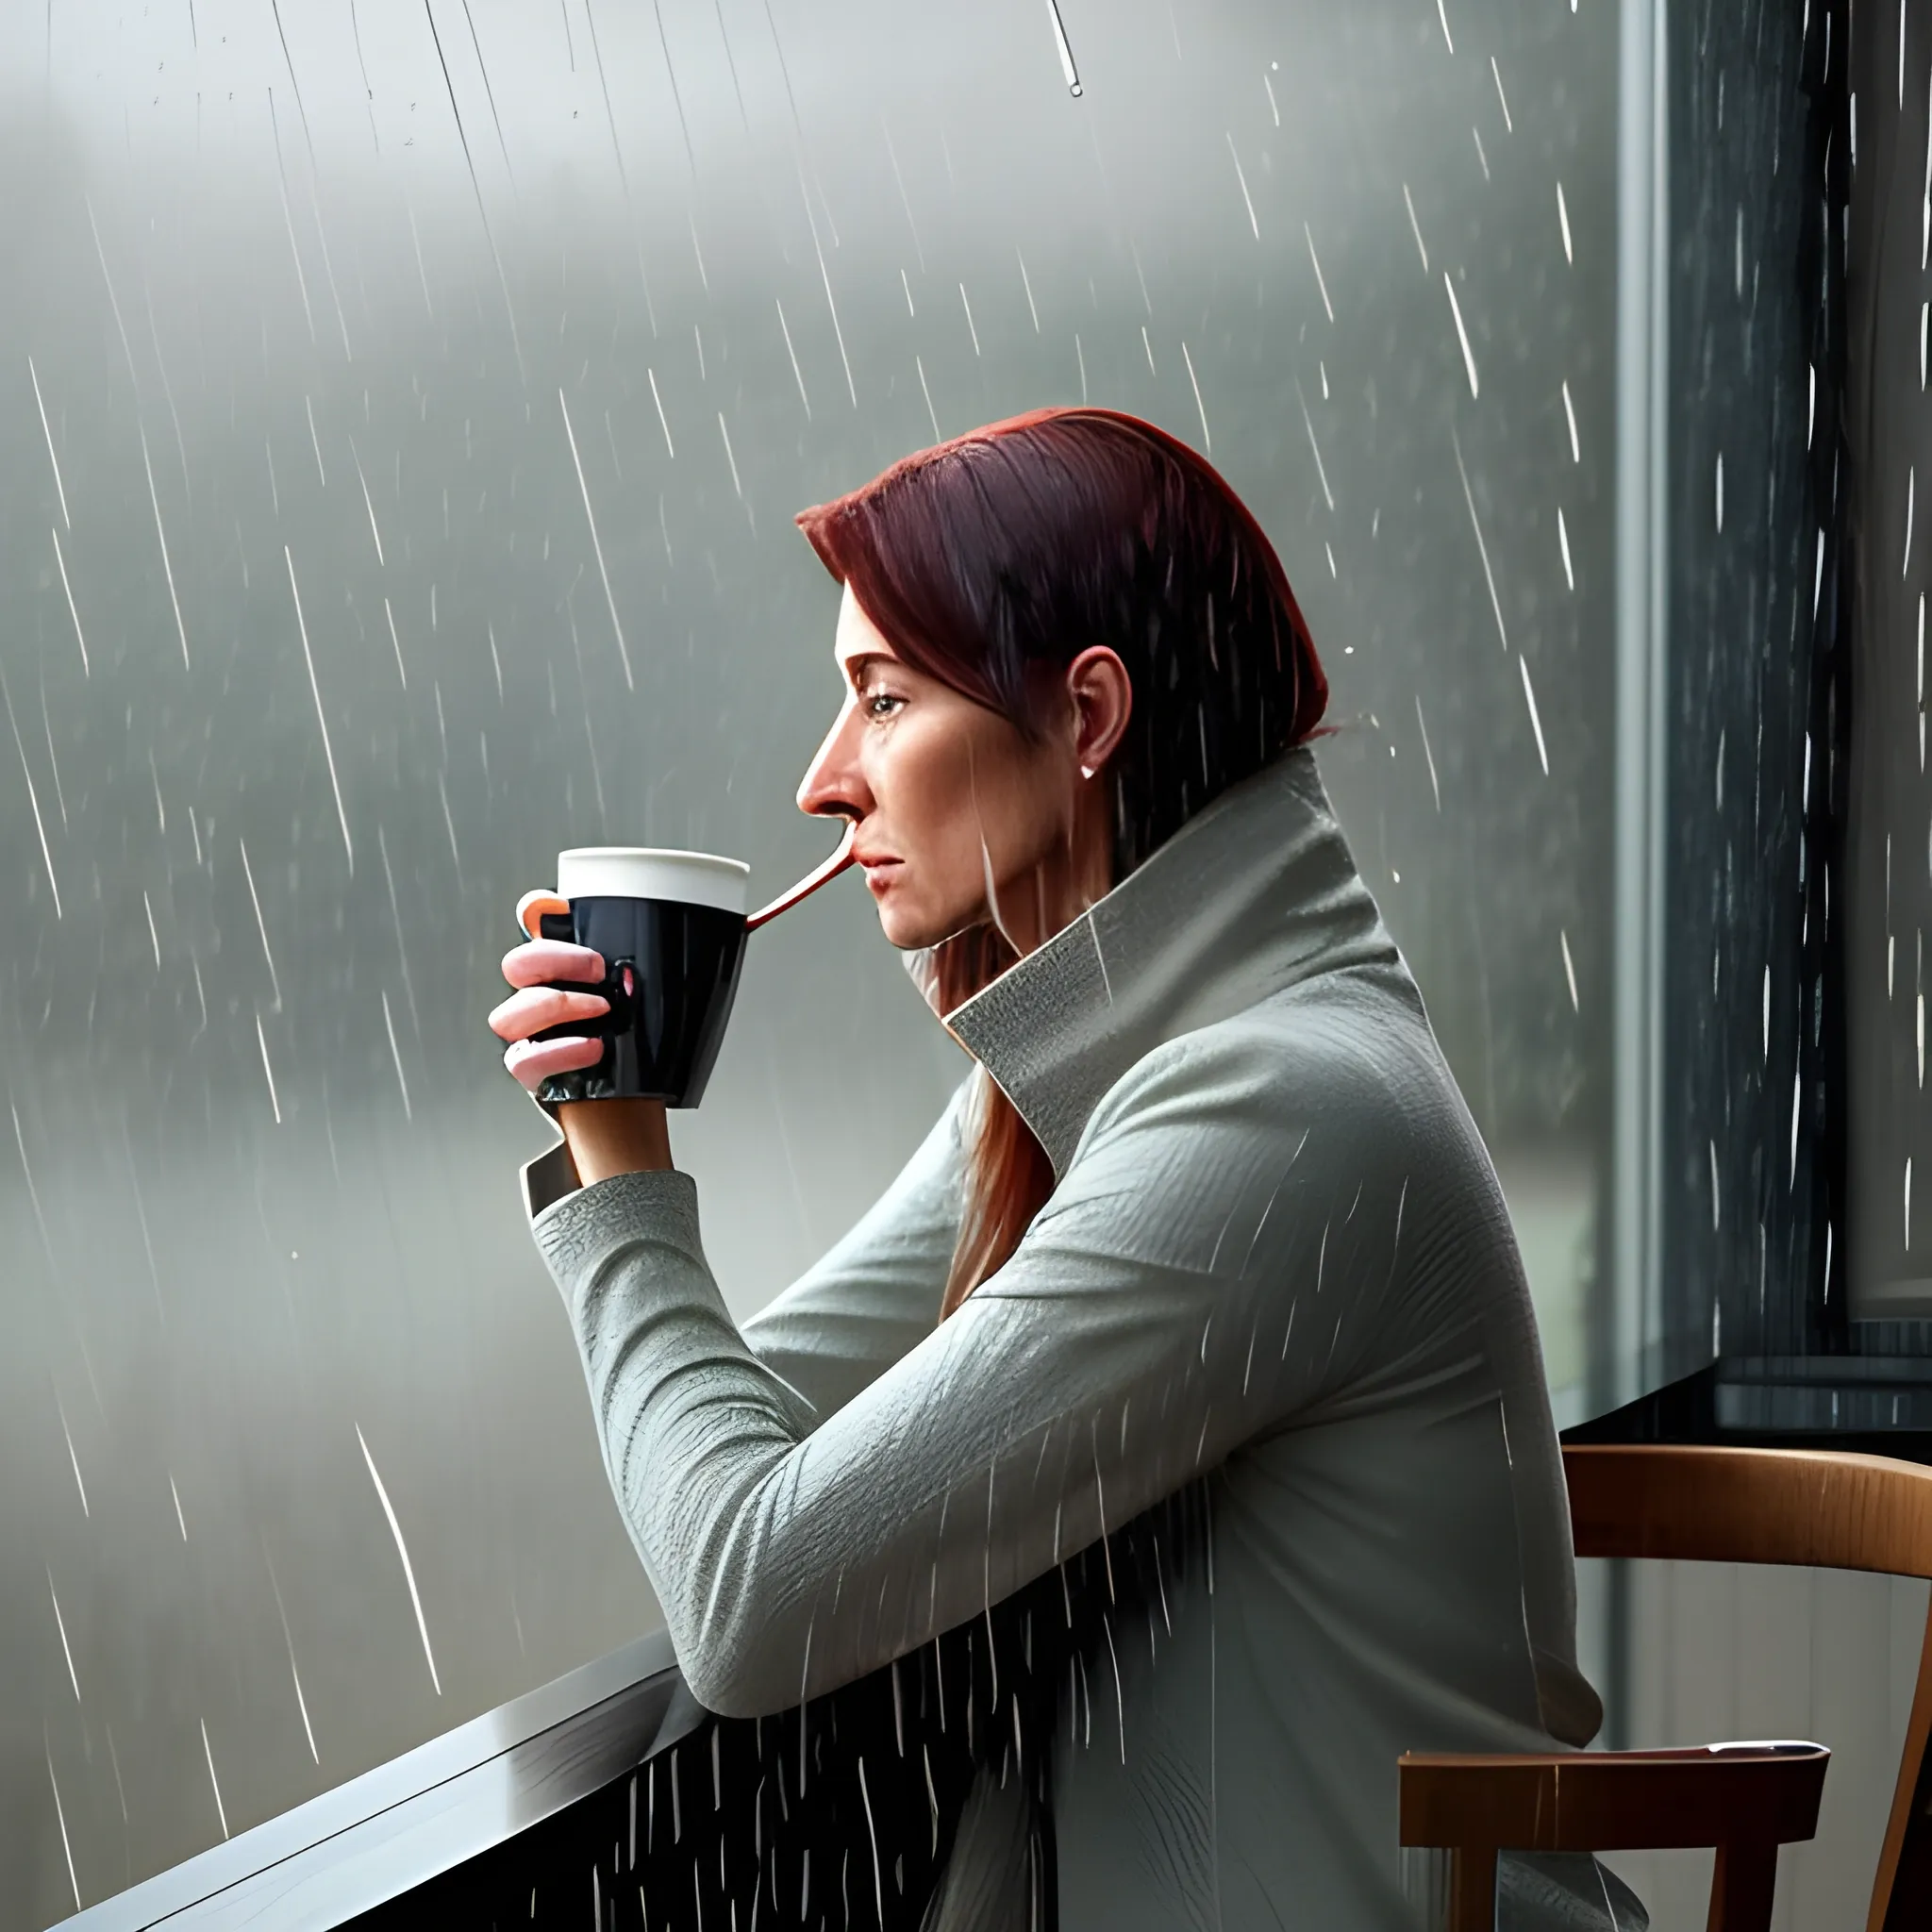 a young woman watches the rain falling heavy while sitting calmly drinking her coffee, one drop of rain window 